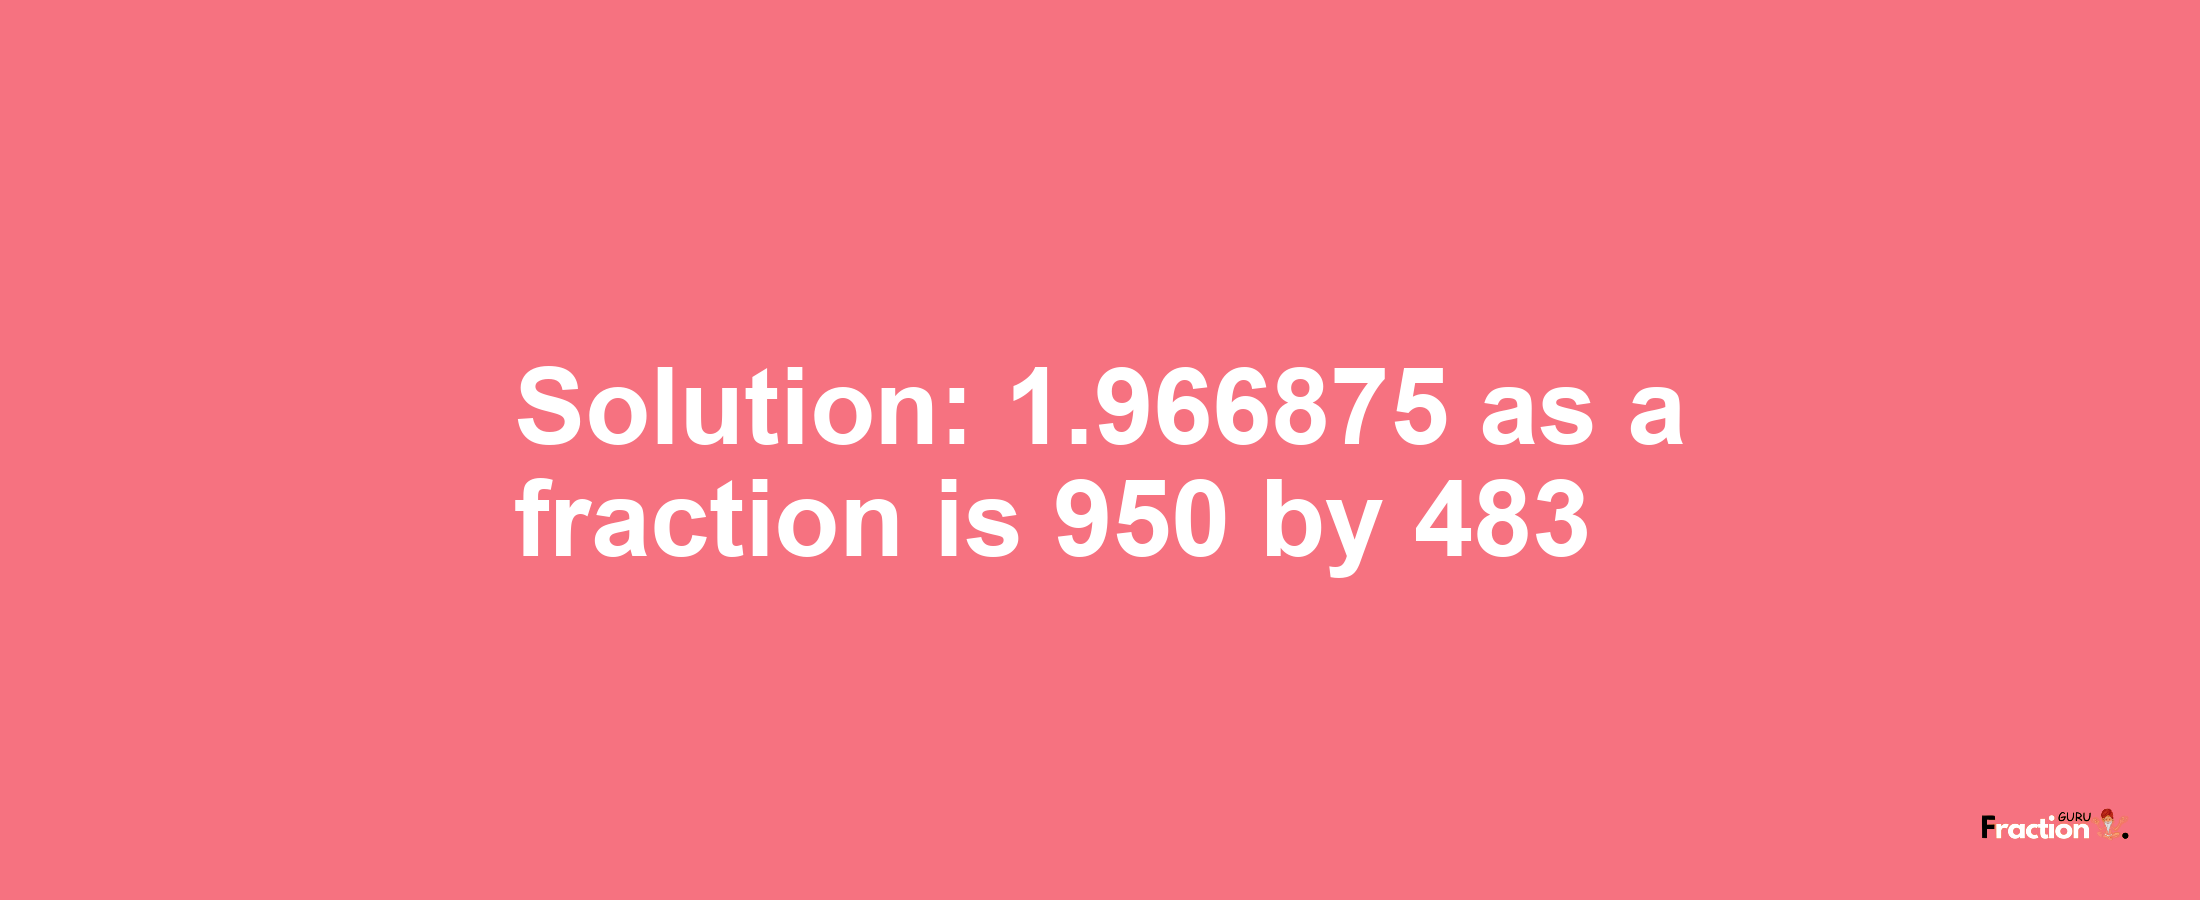 Solution:1.966875 as a fraction is 950/483